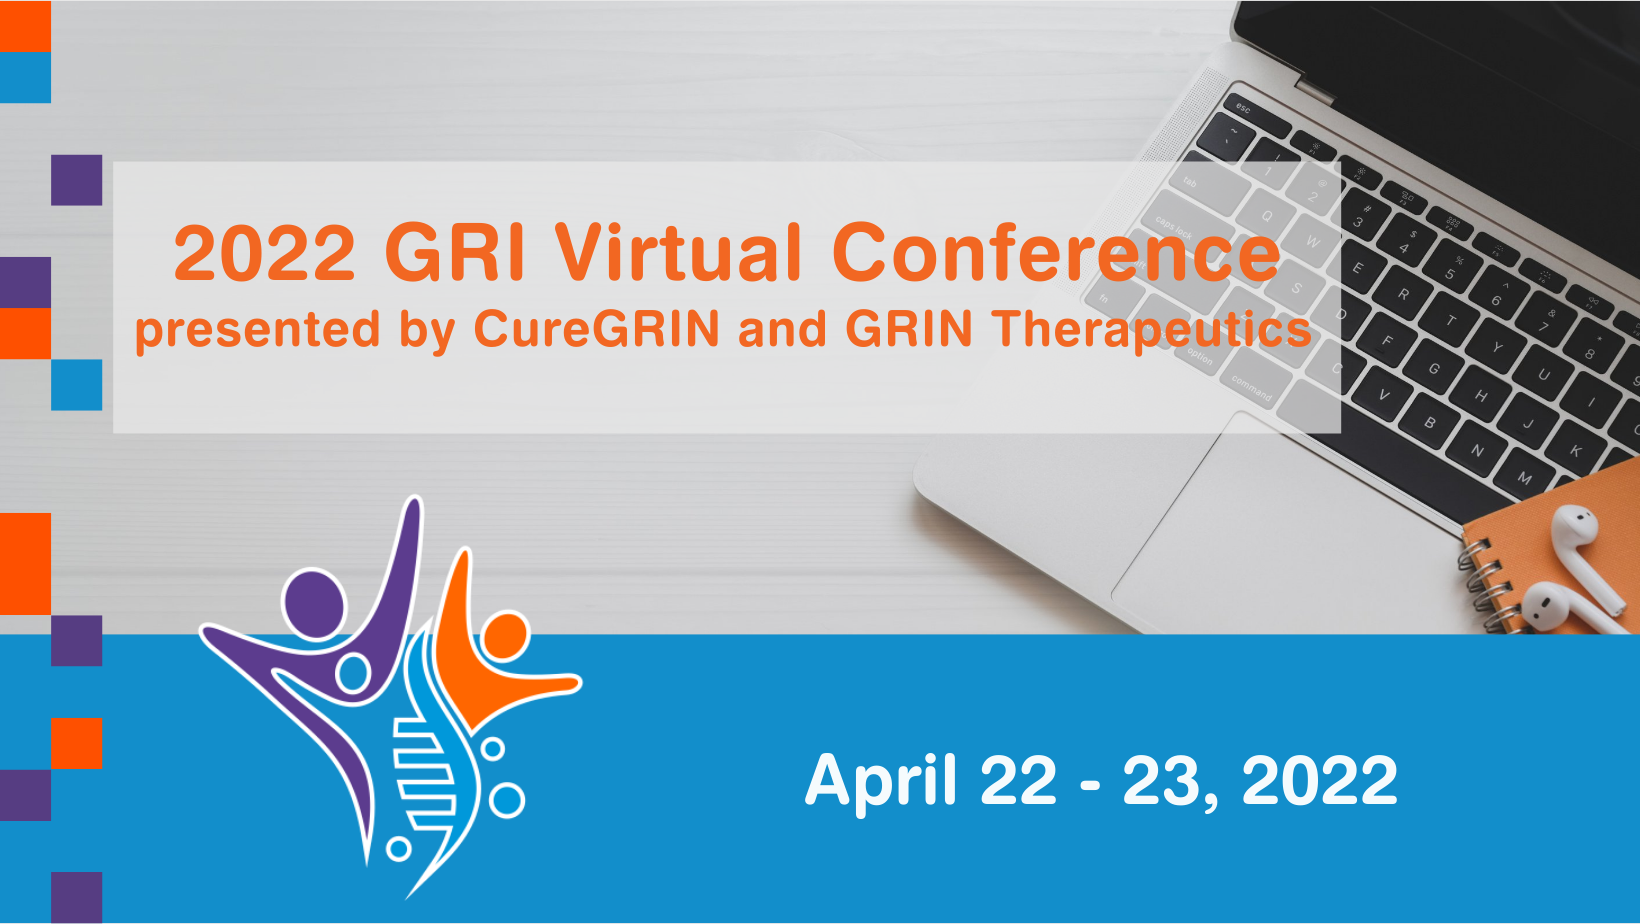 2022 GRI Conference CureGRIN Foundation